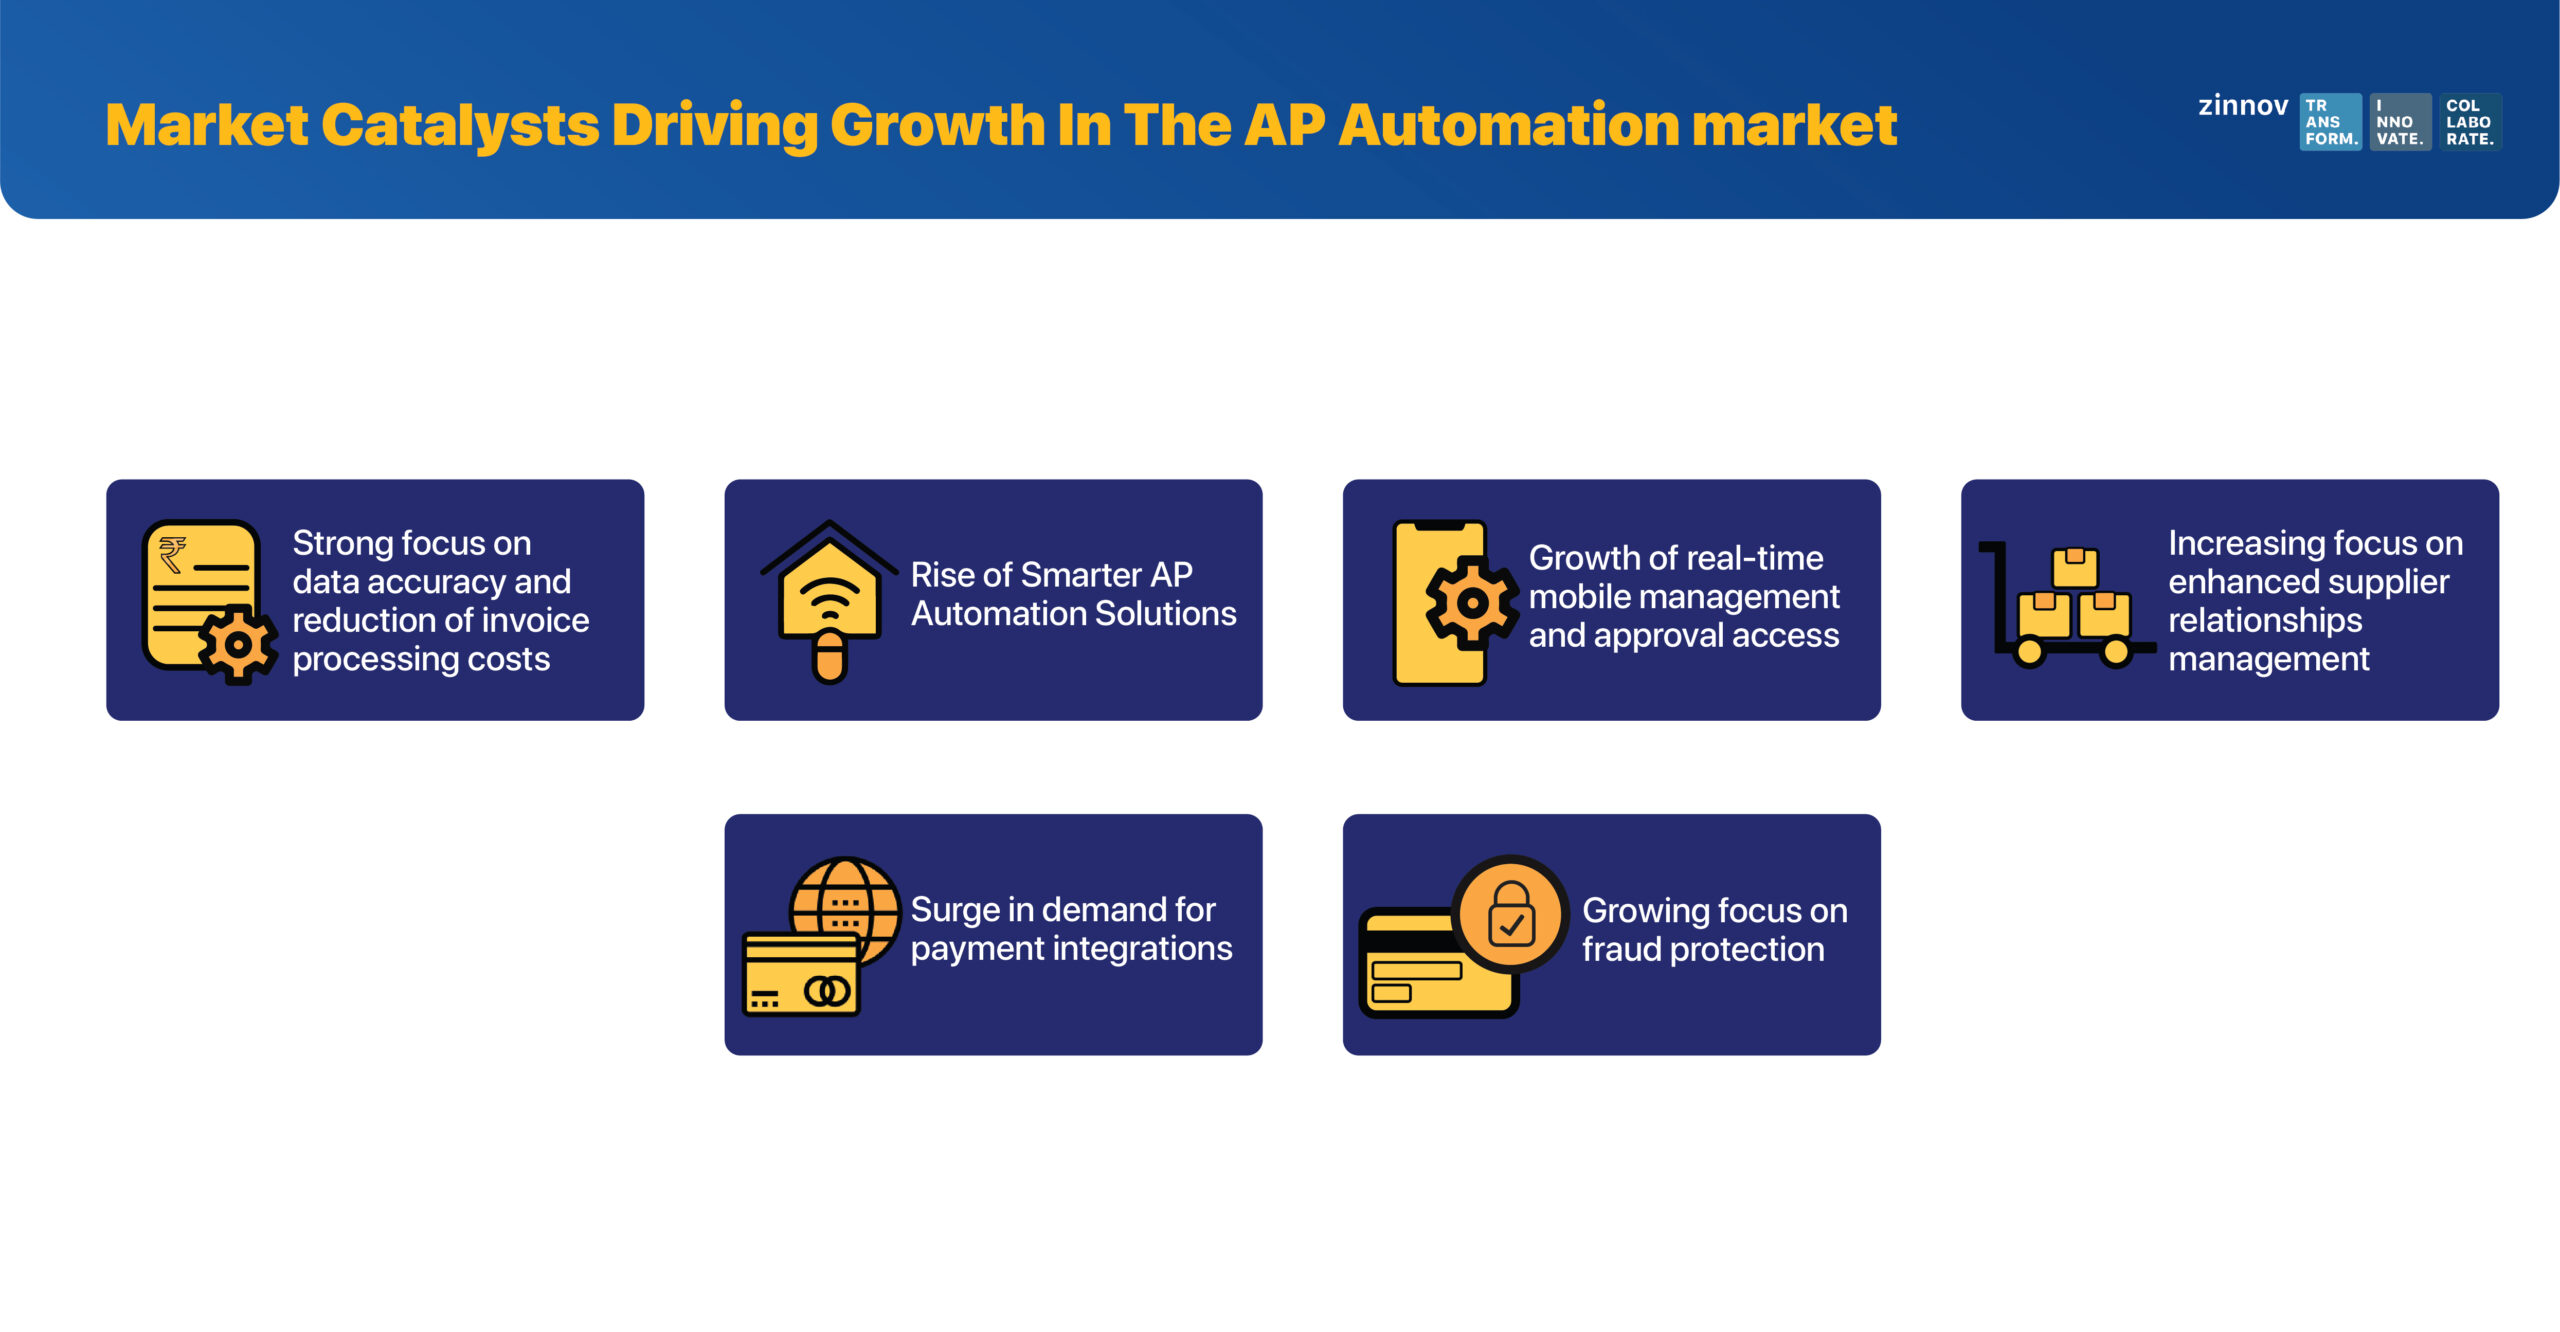 Market Catalysts Driving Growth in the AP Automation market